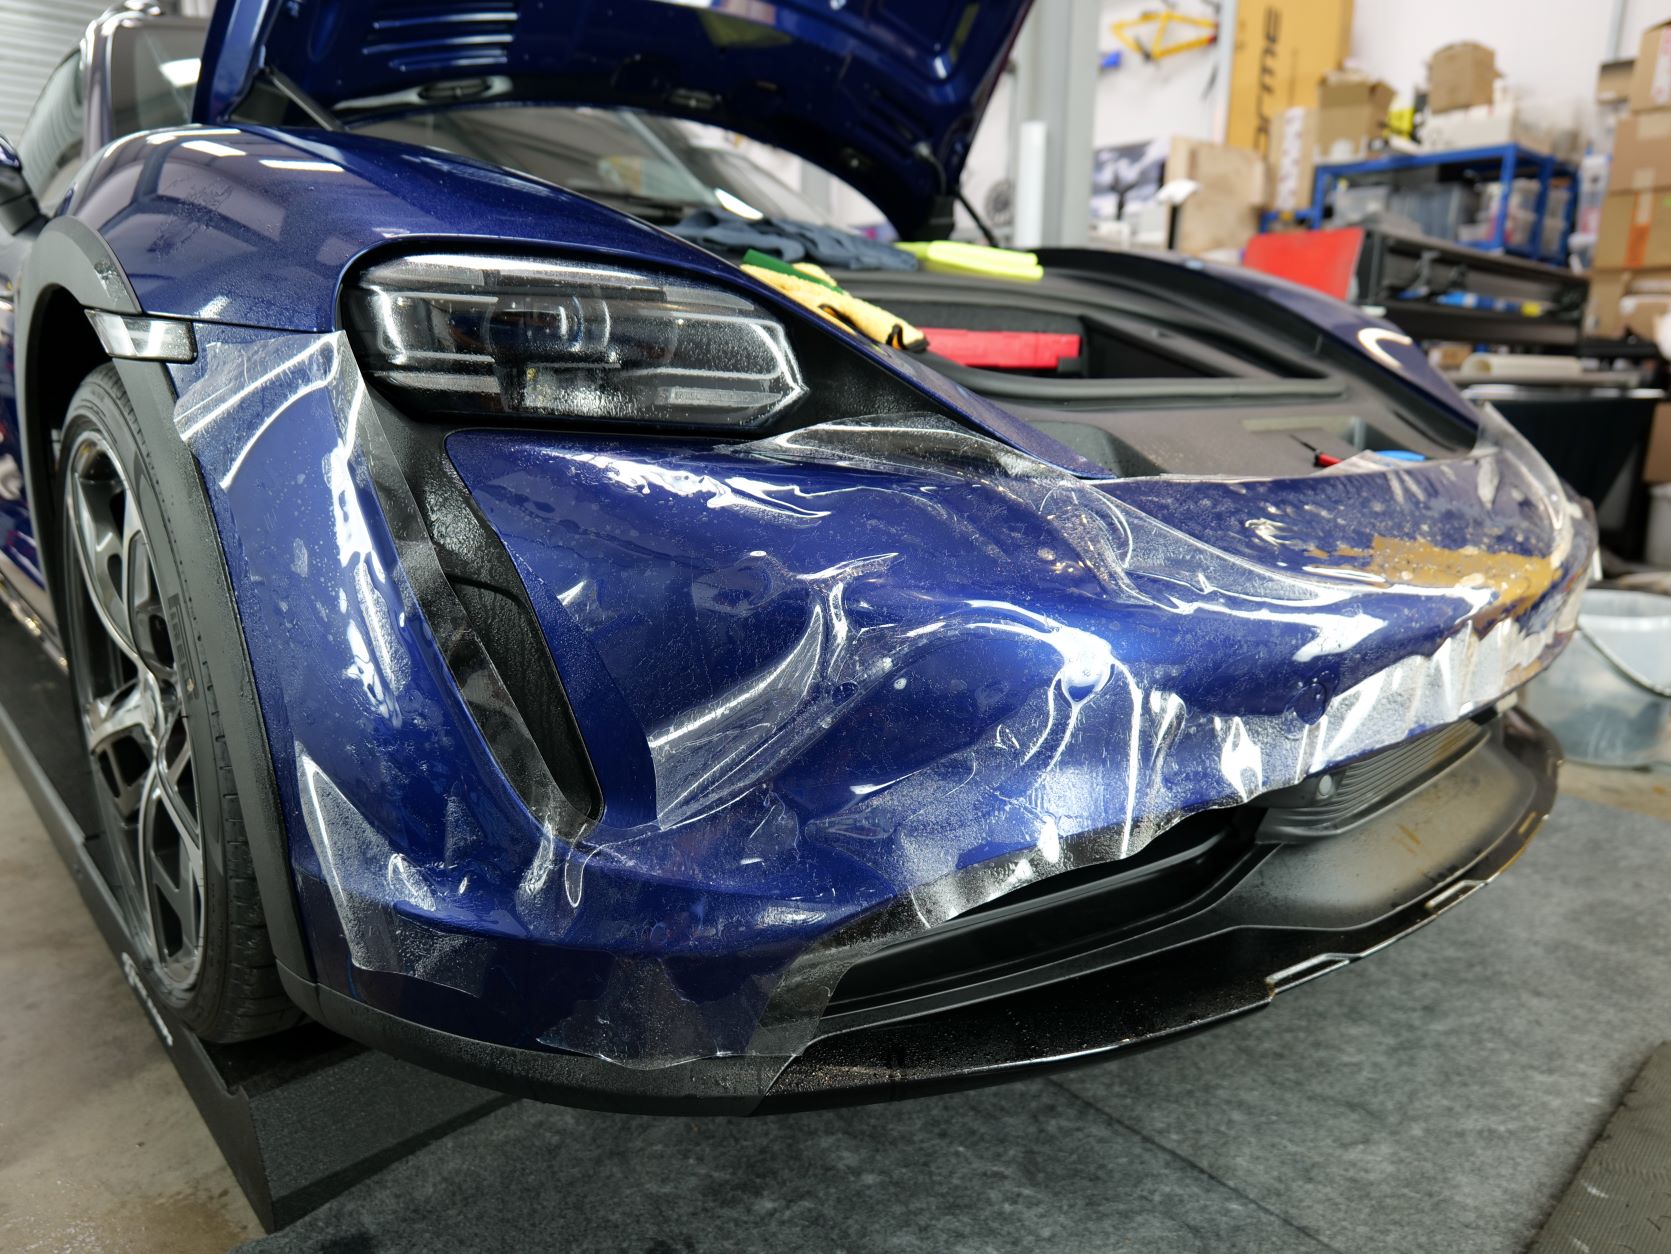 Paint Protection Film (PPF) and the benefits